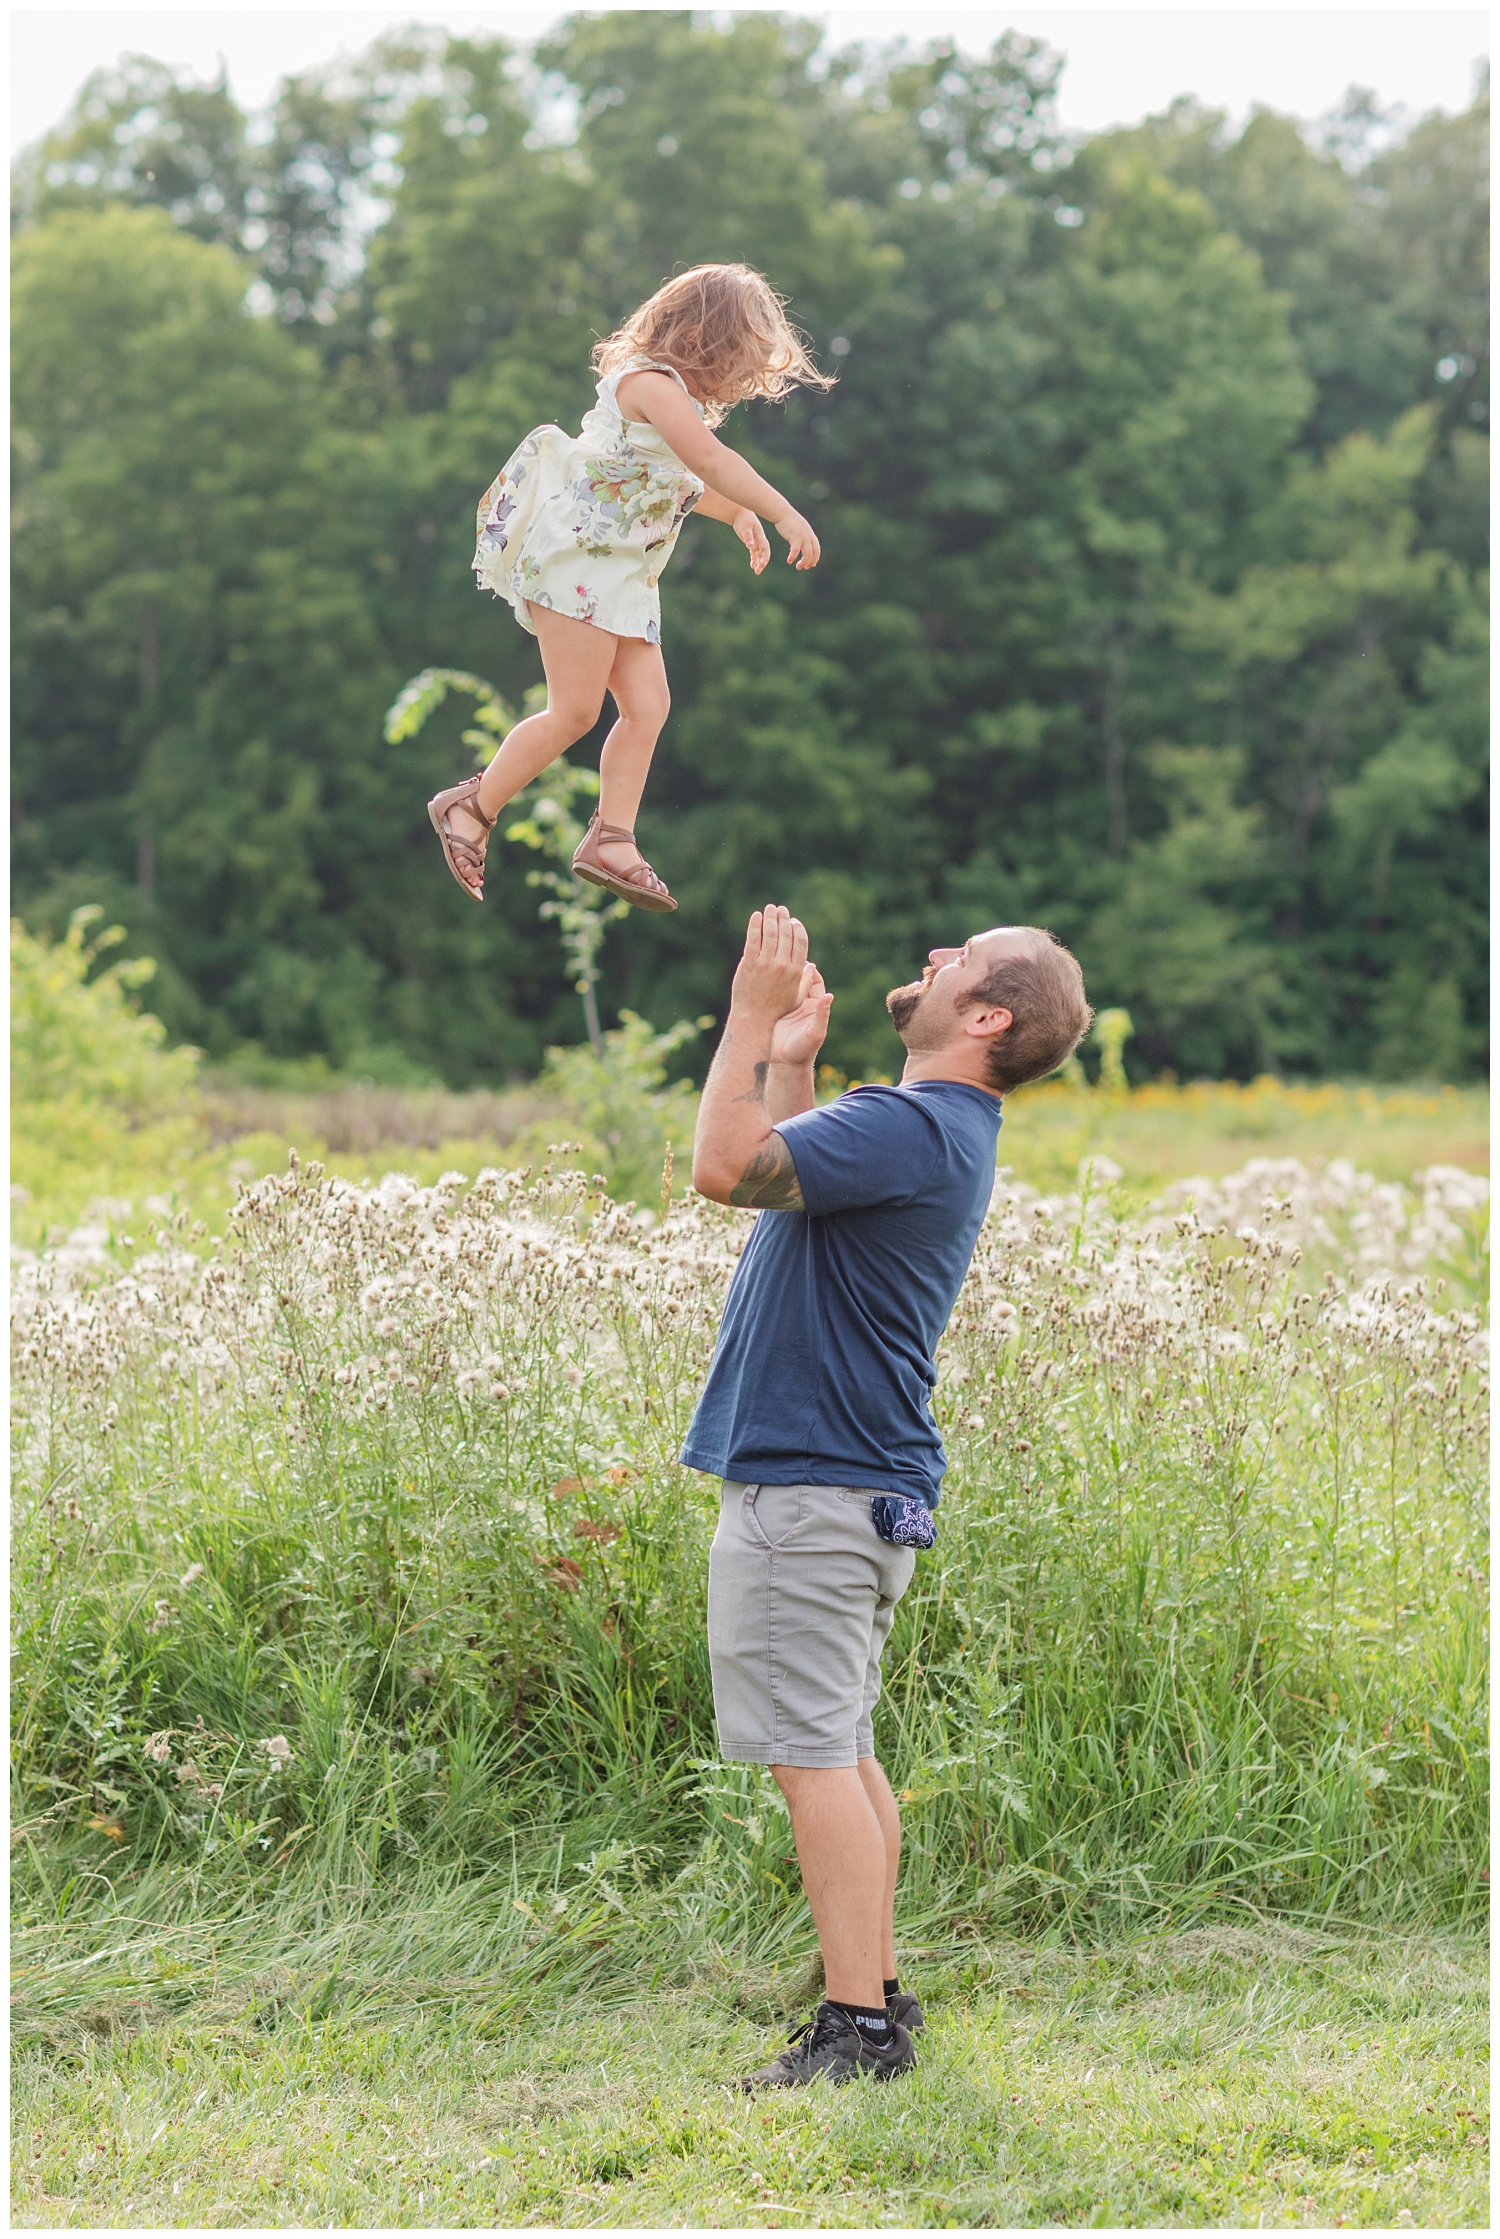 dad throwing his daughter in the air at birthday session